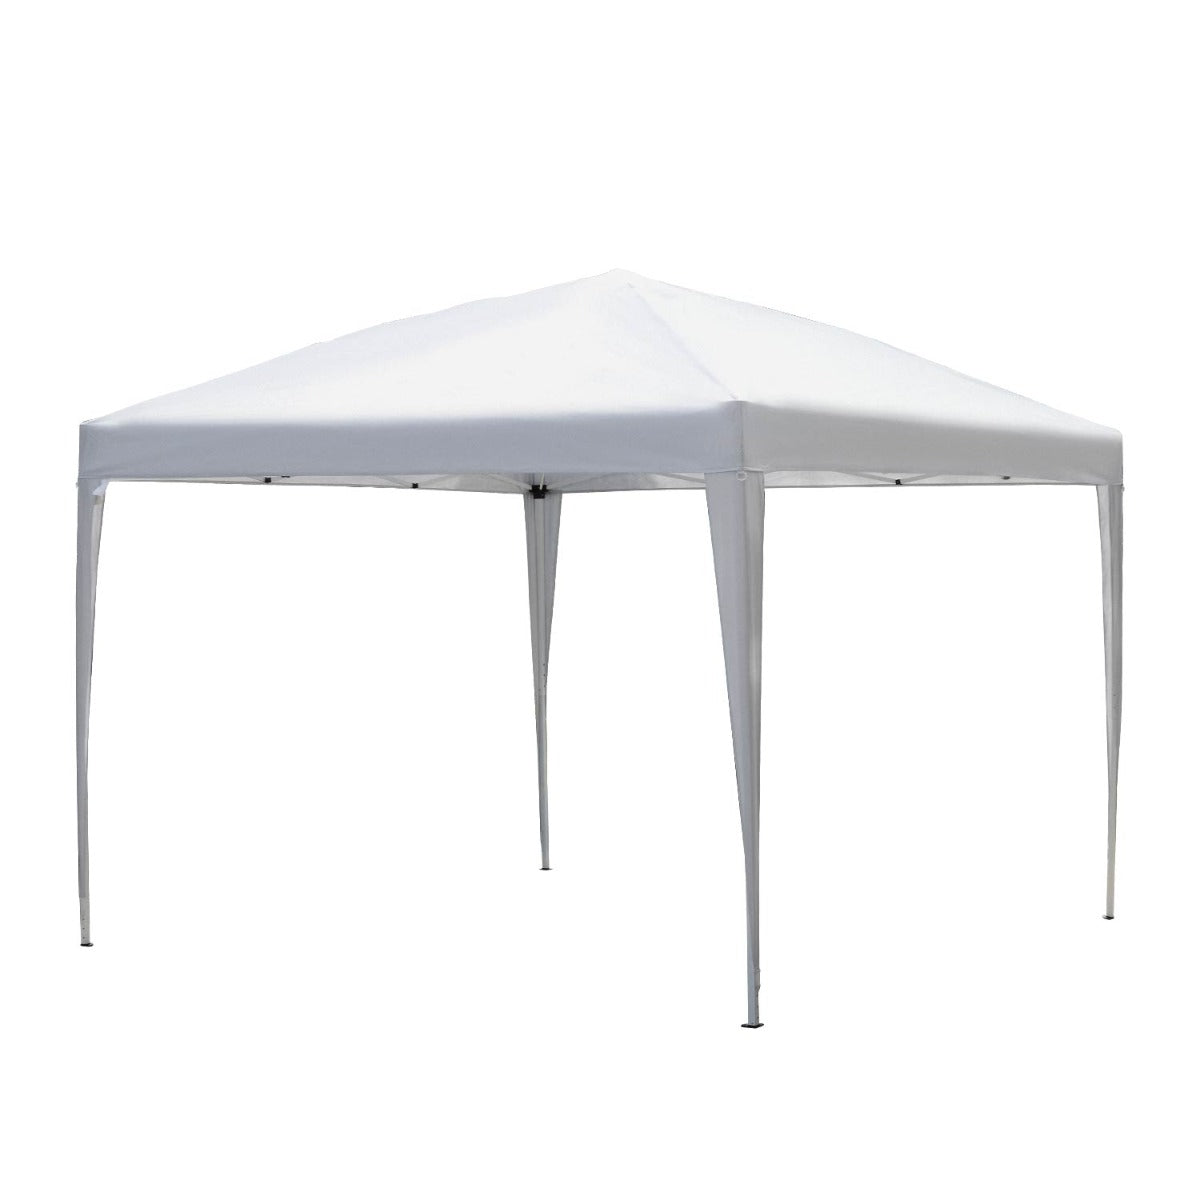 Outsunny 3 x 3 meter Garden Heavy Duty Pop Up Gazebo Marquee Party Tent Folding Wedding Canopy-White